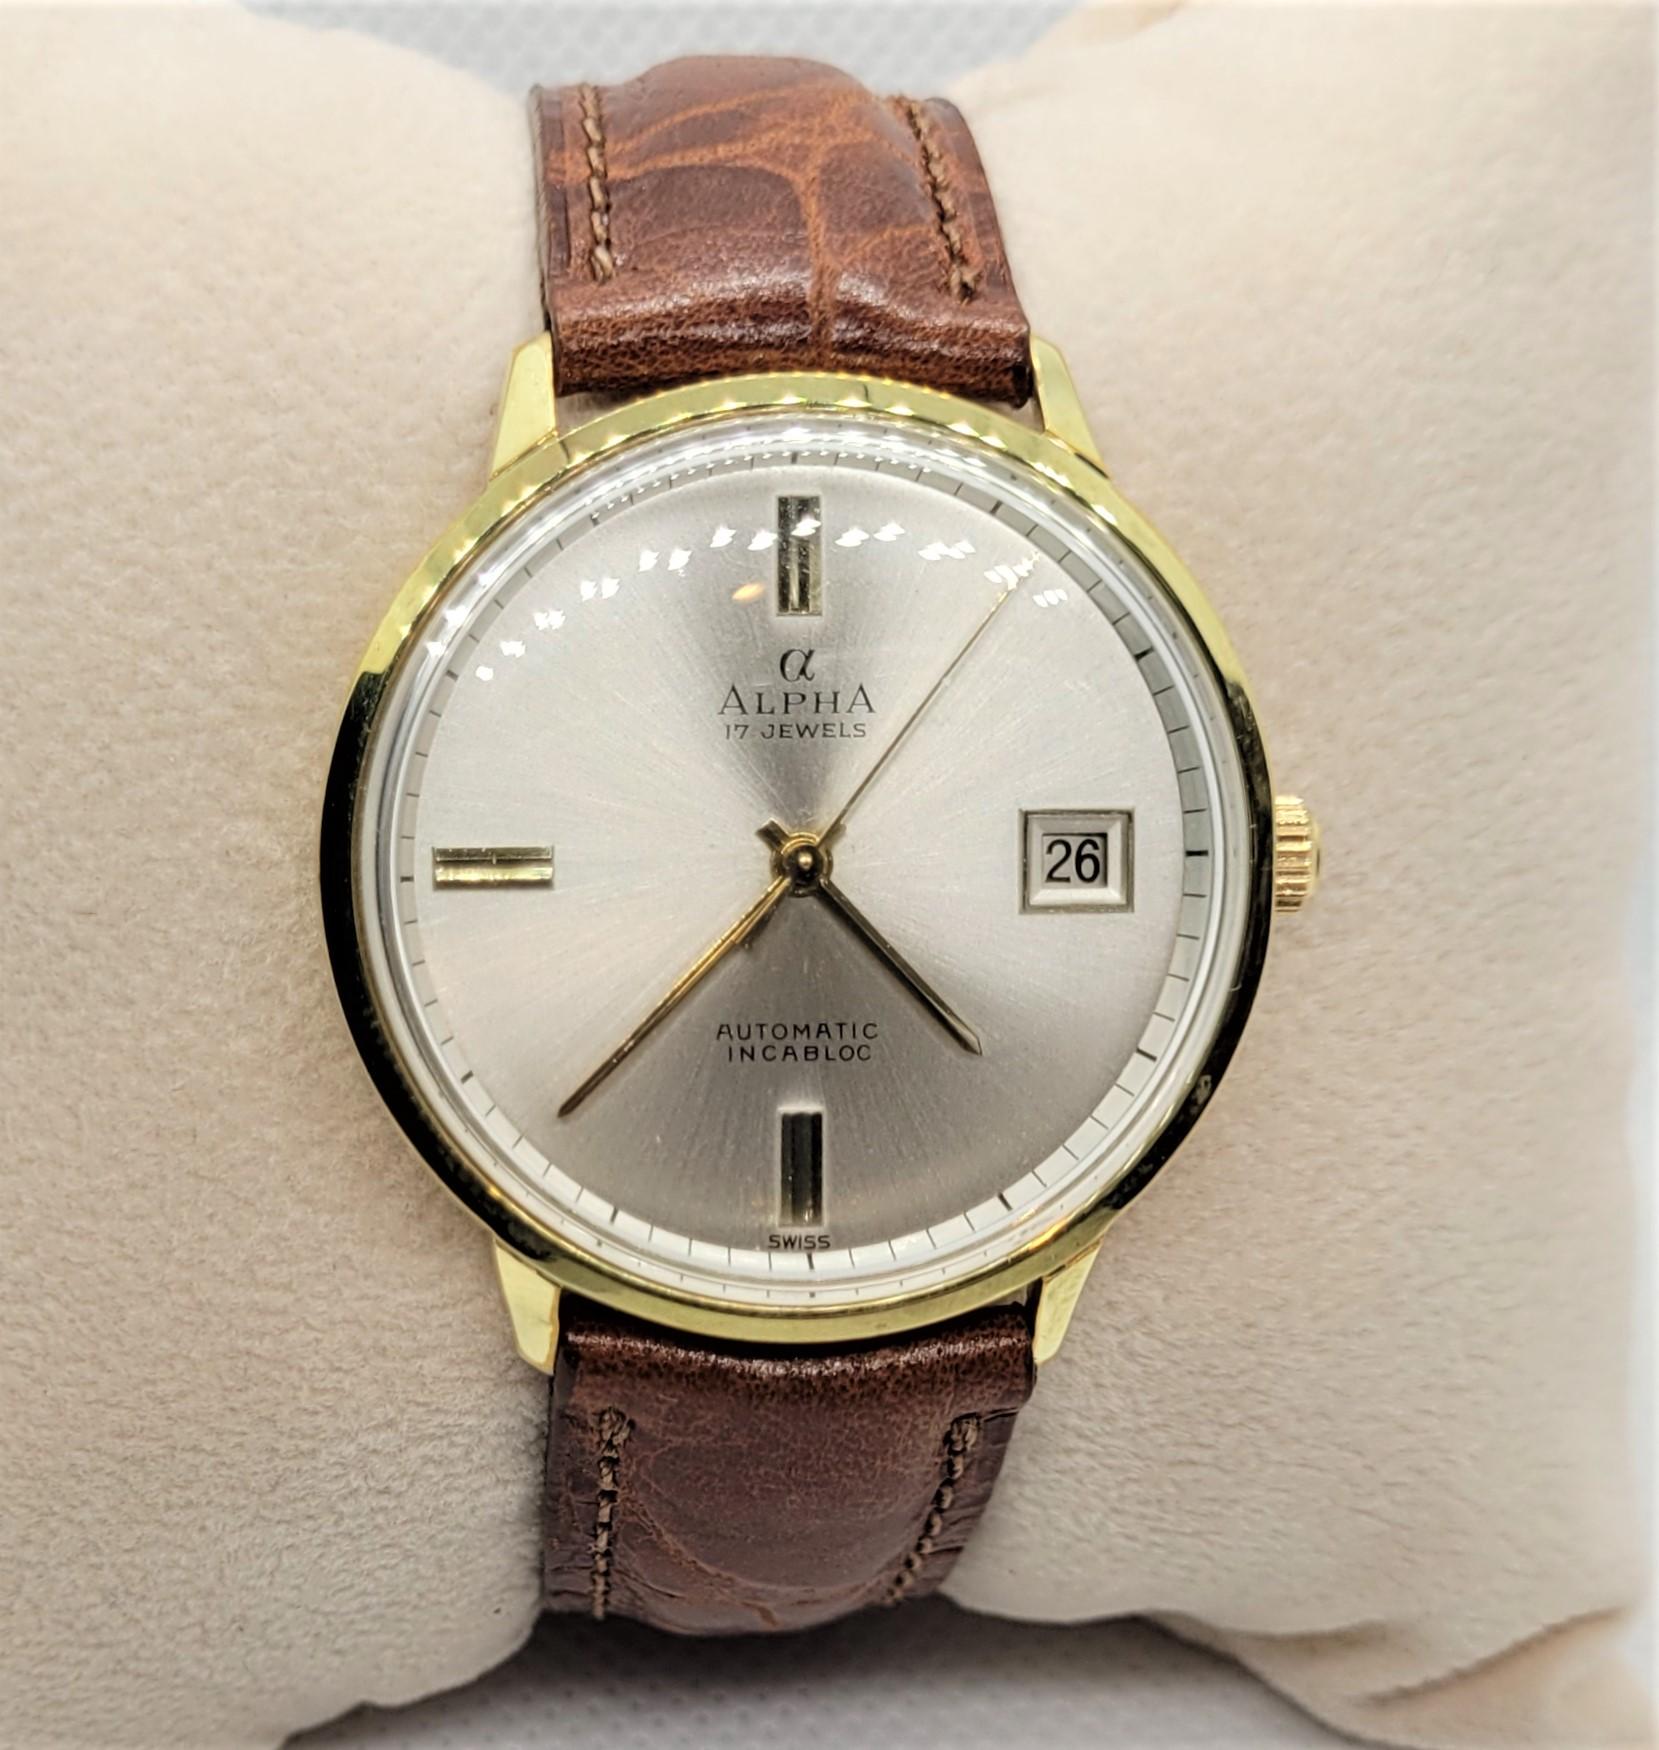 Gorgeous Men's Alpha Watch has a 17 jewel movement and is automatic. This had just been fully cleaned and overhauled and comes with a 90-day warranty. The watch is in very good working condition.  The case is 35mm diameter, gold plated, with a